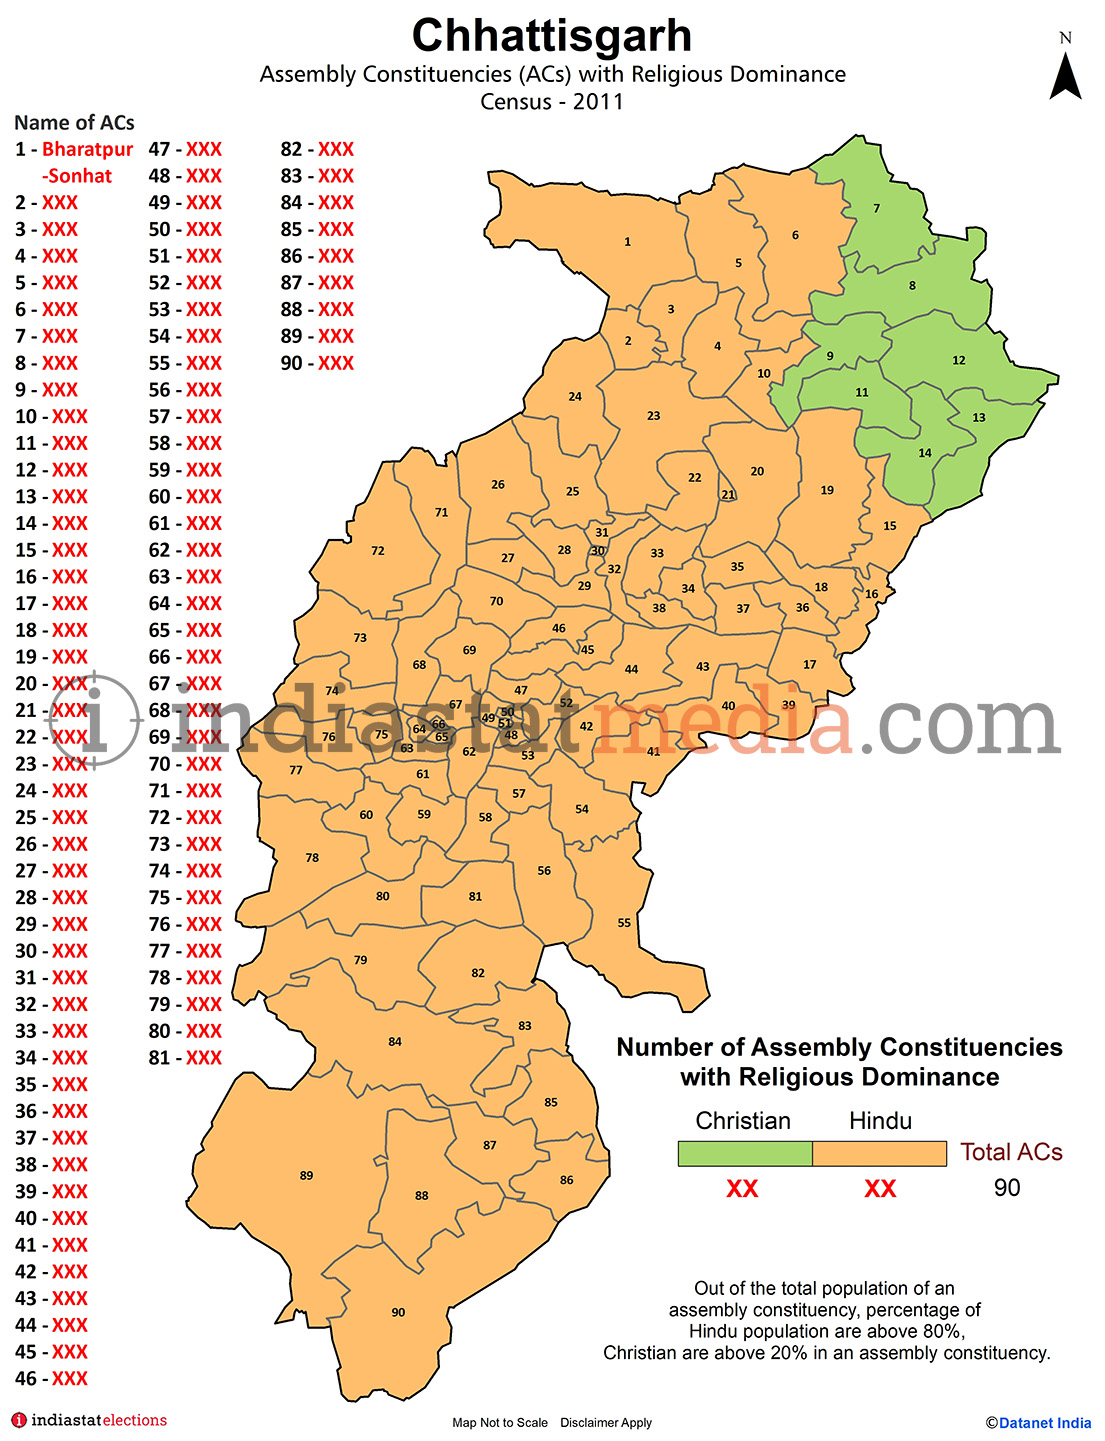 Assembly Constituencies (ACs) with Religious Dominance in Chhattisgarh - Census 2011